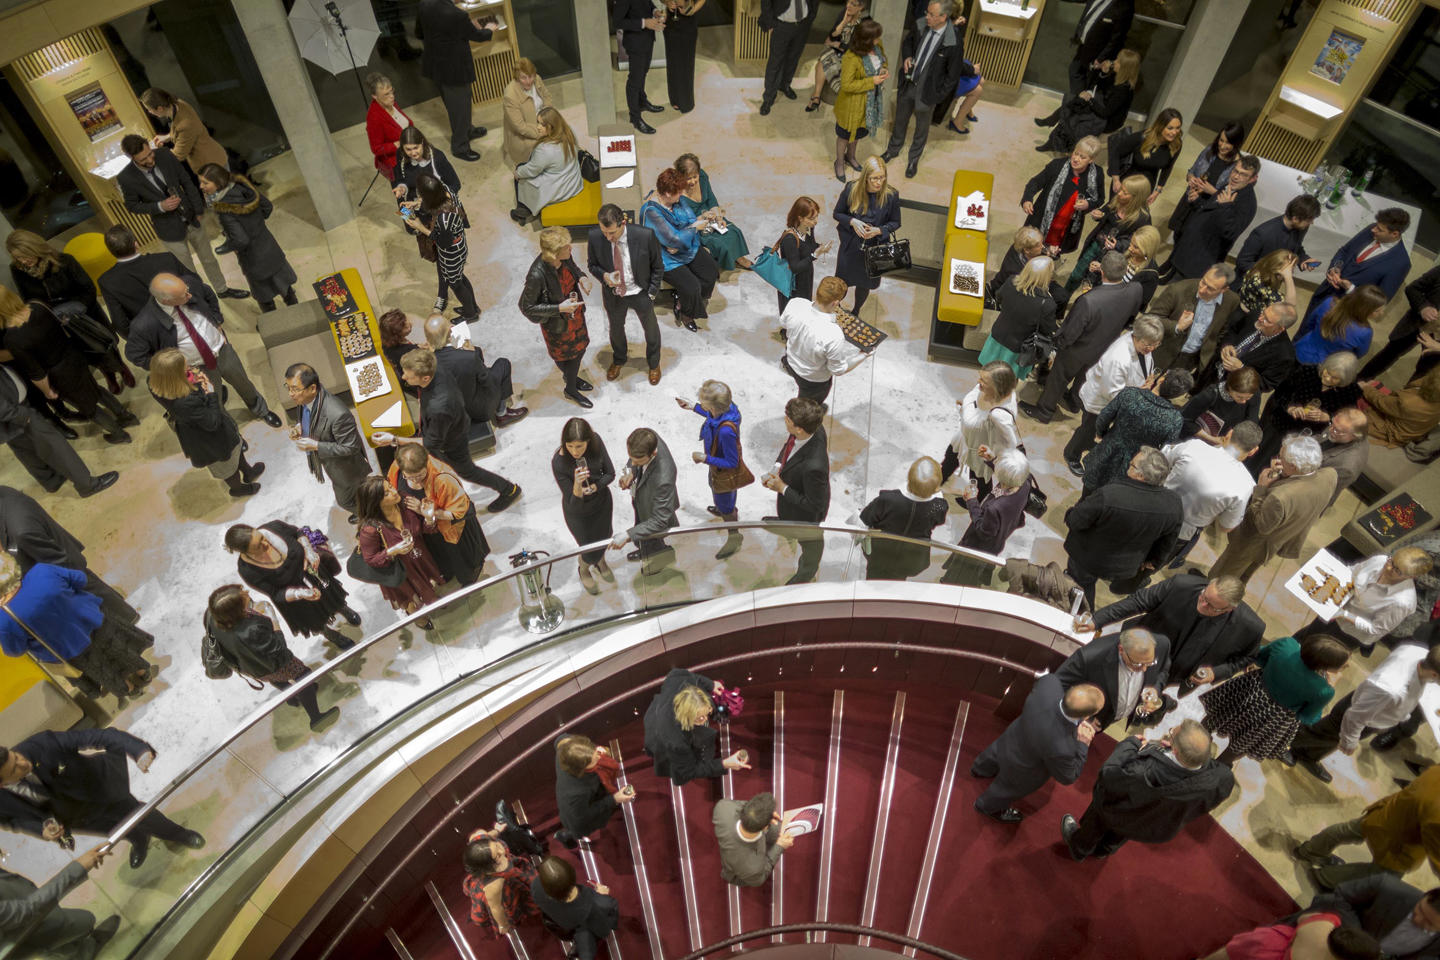 Audience members gathered in an upper level in Theatre Royal Glasgow, looking down the main spiral staircase